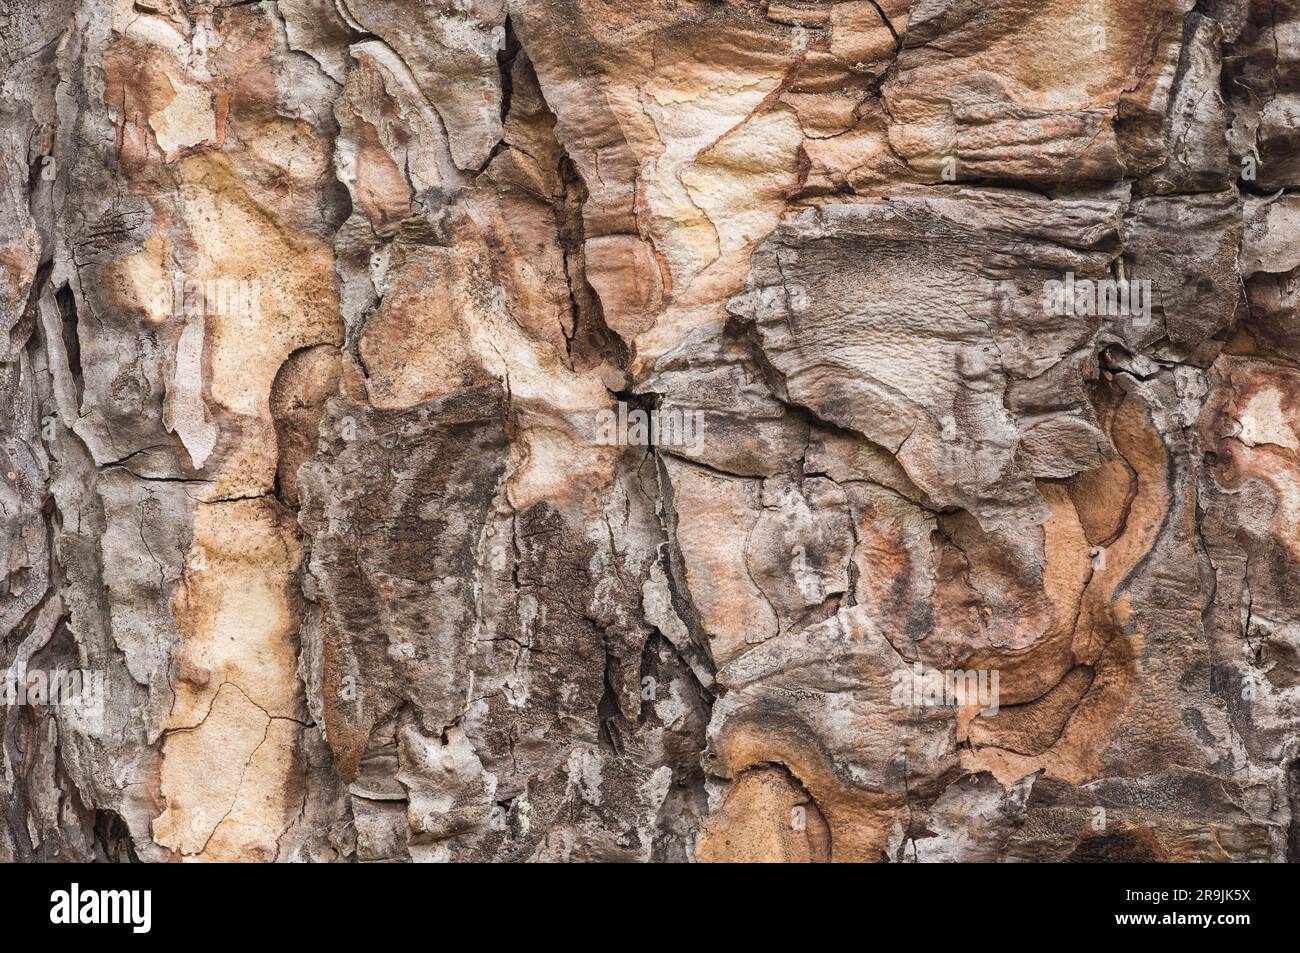 Textures in the weathered bark of a Crimean pine known as wells as Pinus nigra v. pallisiana Stock Photo